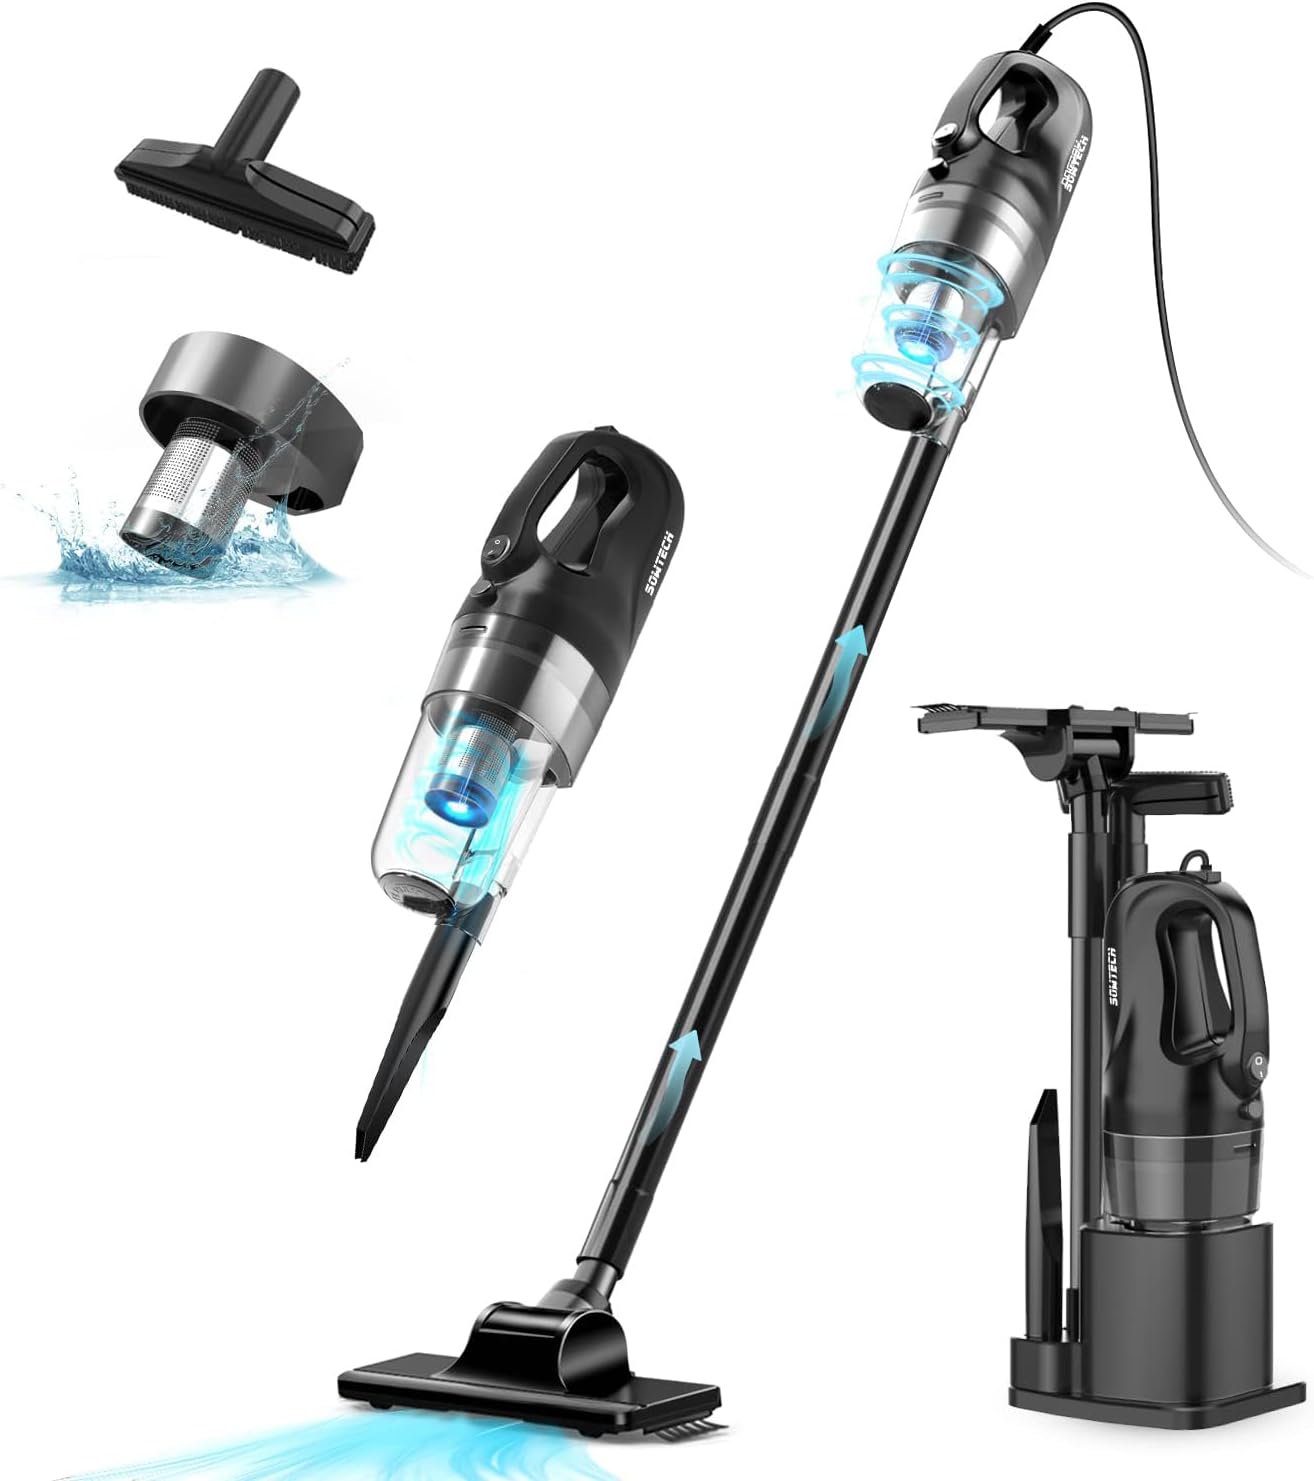 SOWTECH Corded Stick Vacuum Cleaner